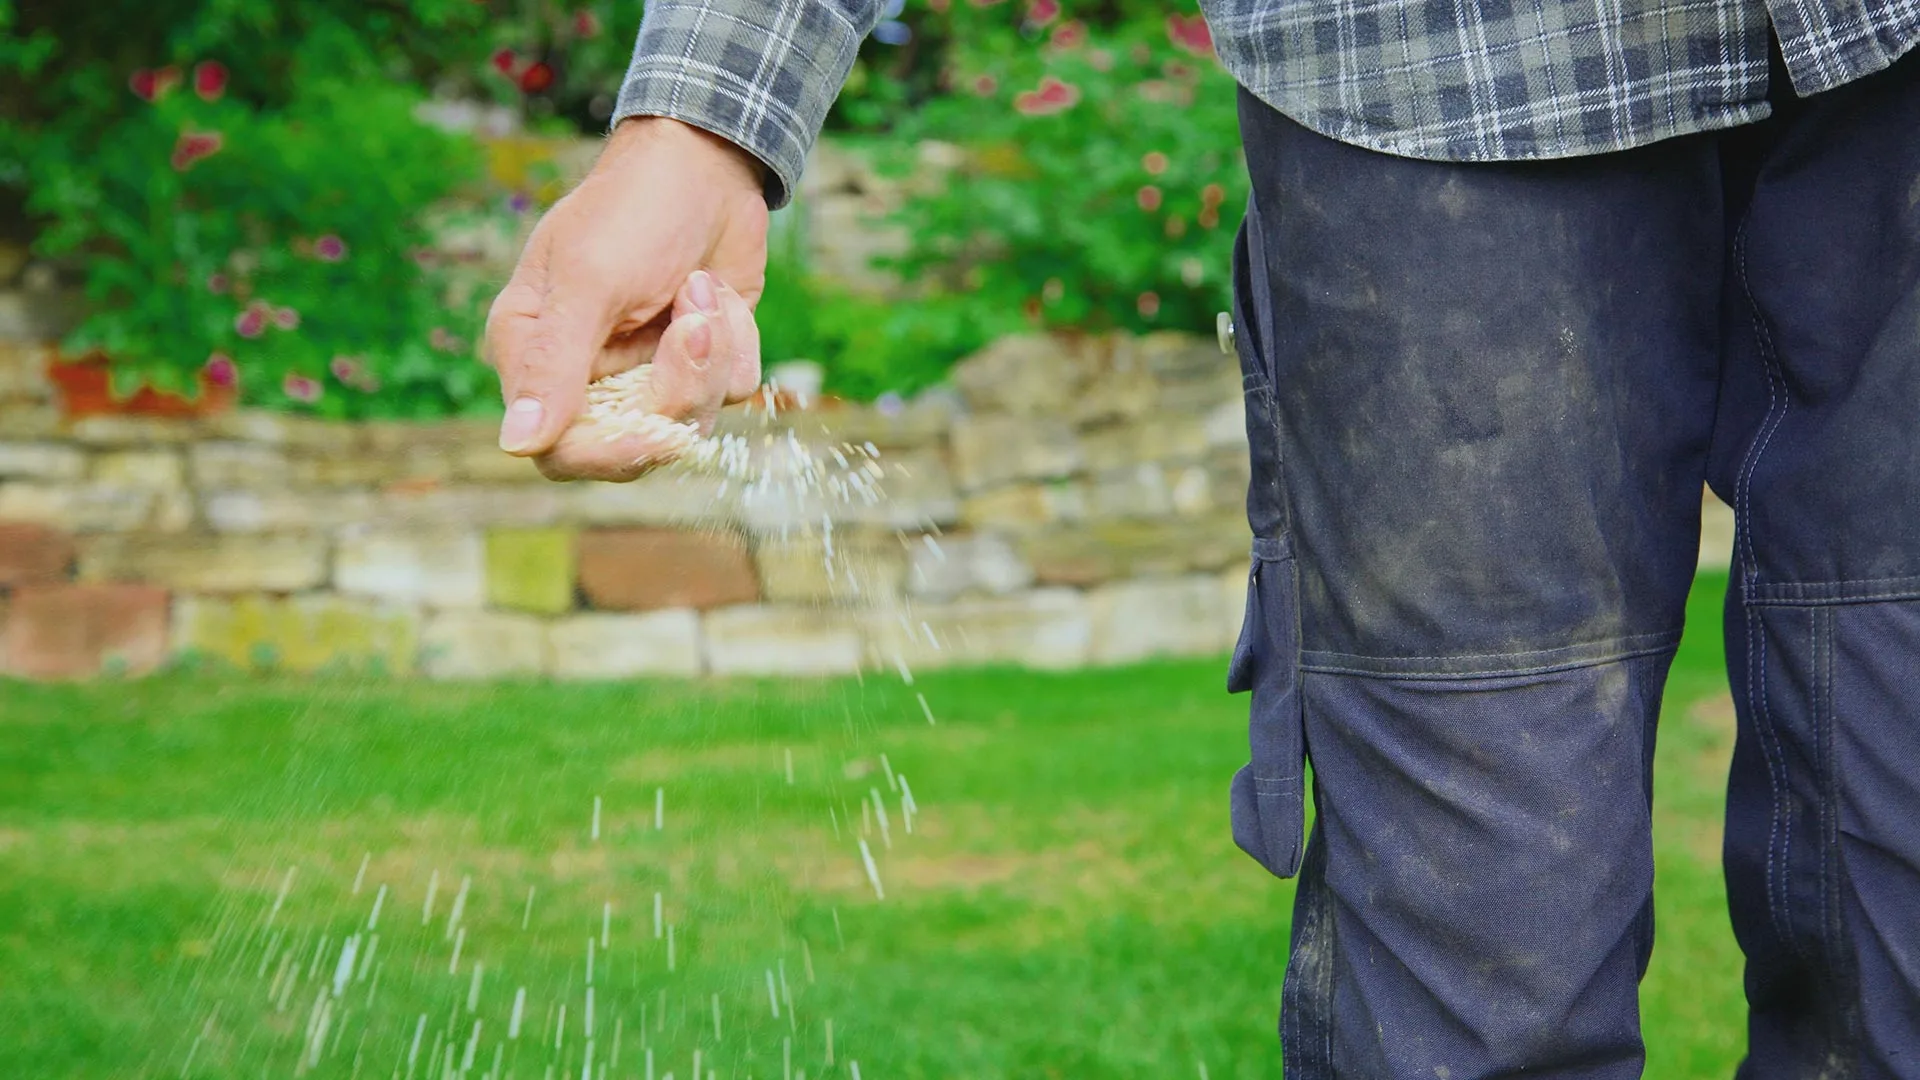 Fertilizing Your Own Lawn Is a Bad Idea - Hire Pros to Do It for You!